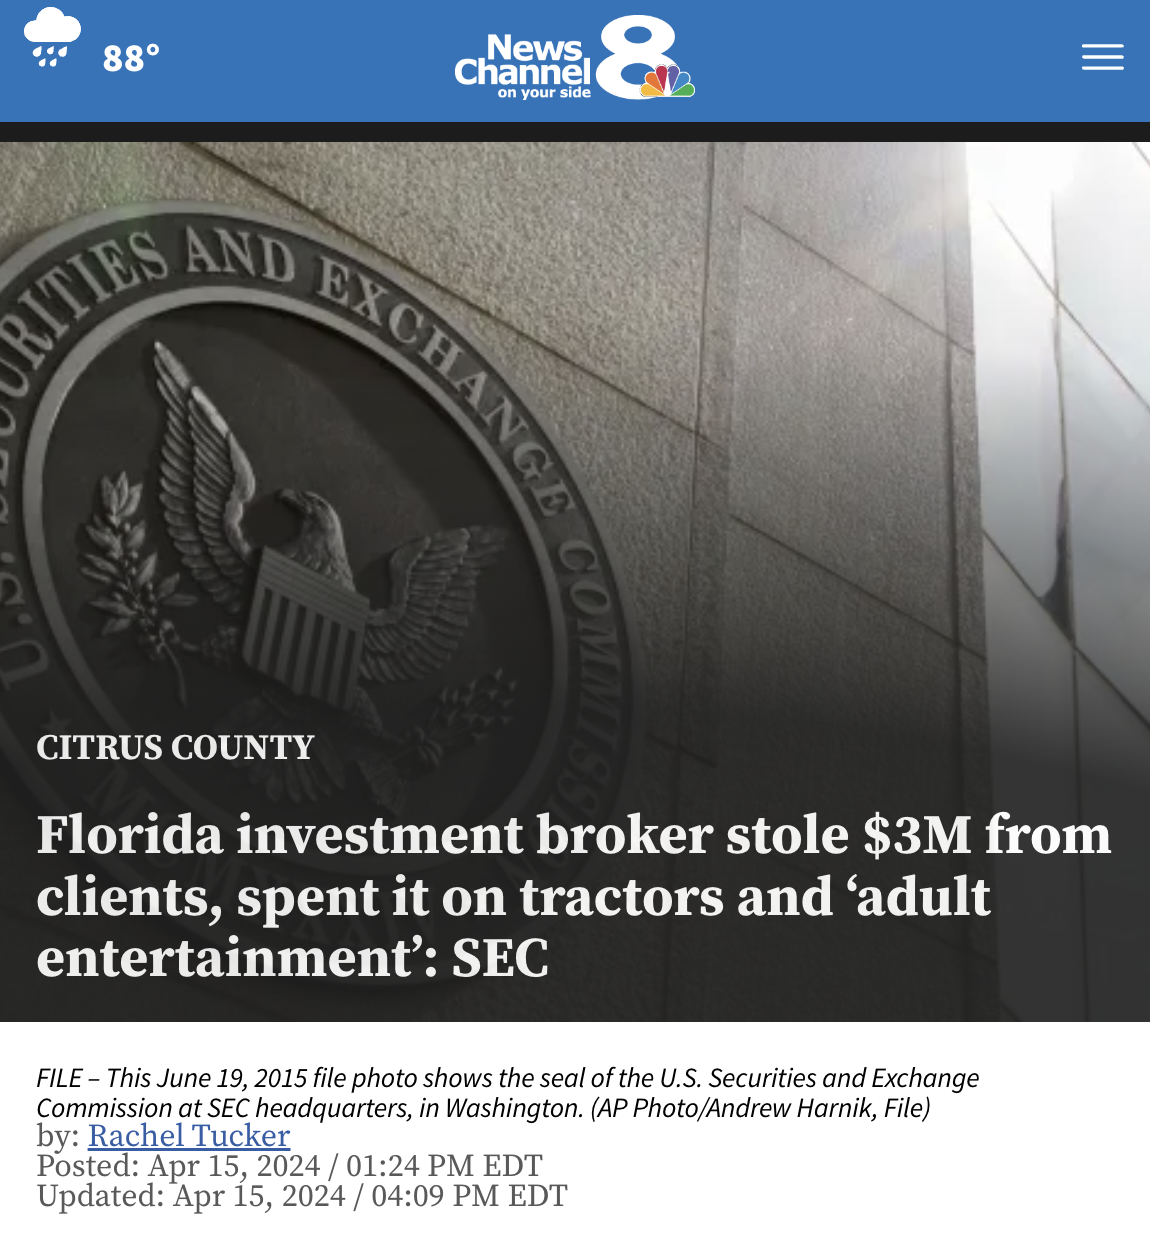 online advertising - 88 News, Channel on your side & 20 Rities And Exchange 1 Citrus County Florida investment broker stole $3M from clients, spent it on tractors and 'adult entertainment' Sec File This file photo shows the seal of the U.S. Securities and